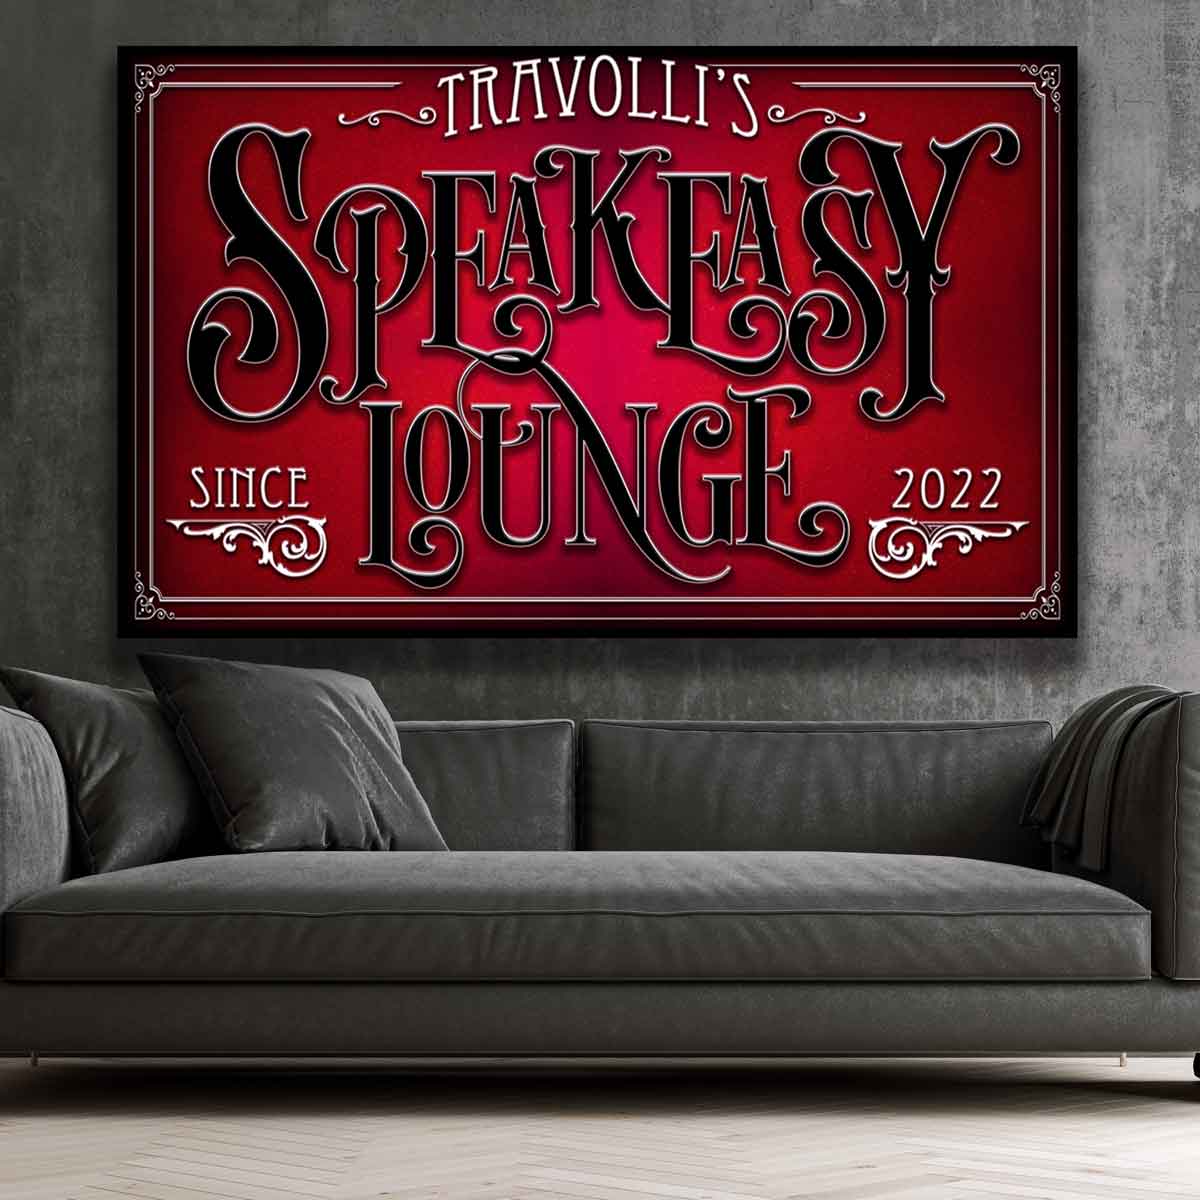 Speakeasy Lounge Sign in Crushed velvet red background with Family Name and words Speakeasy Lounge